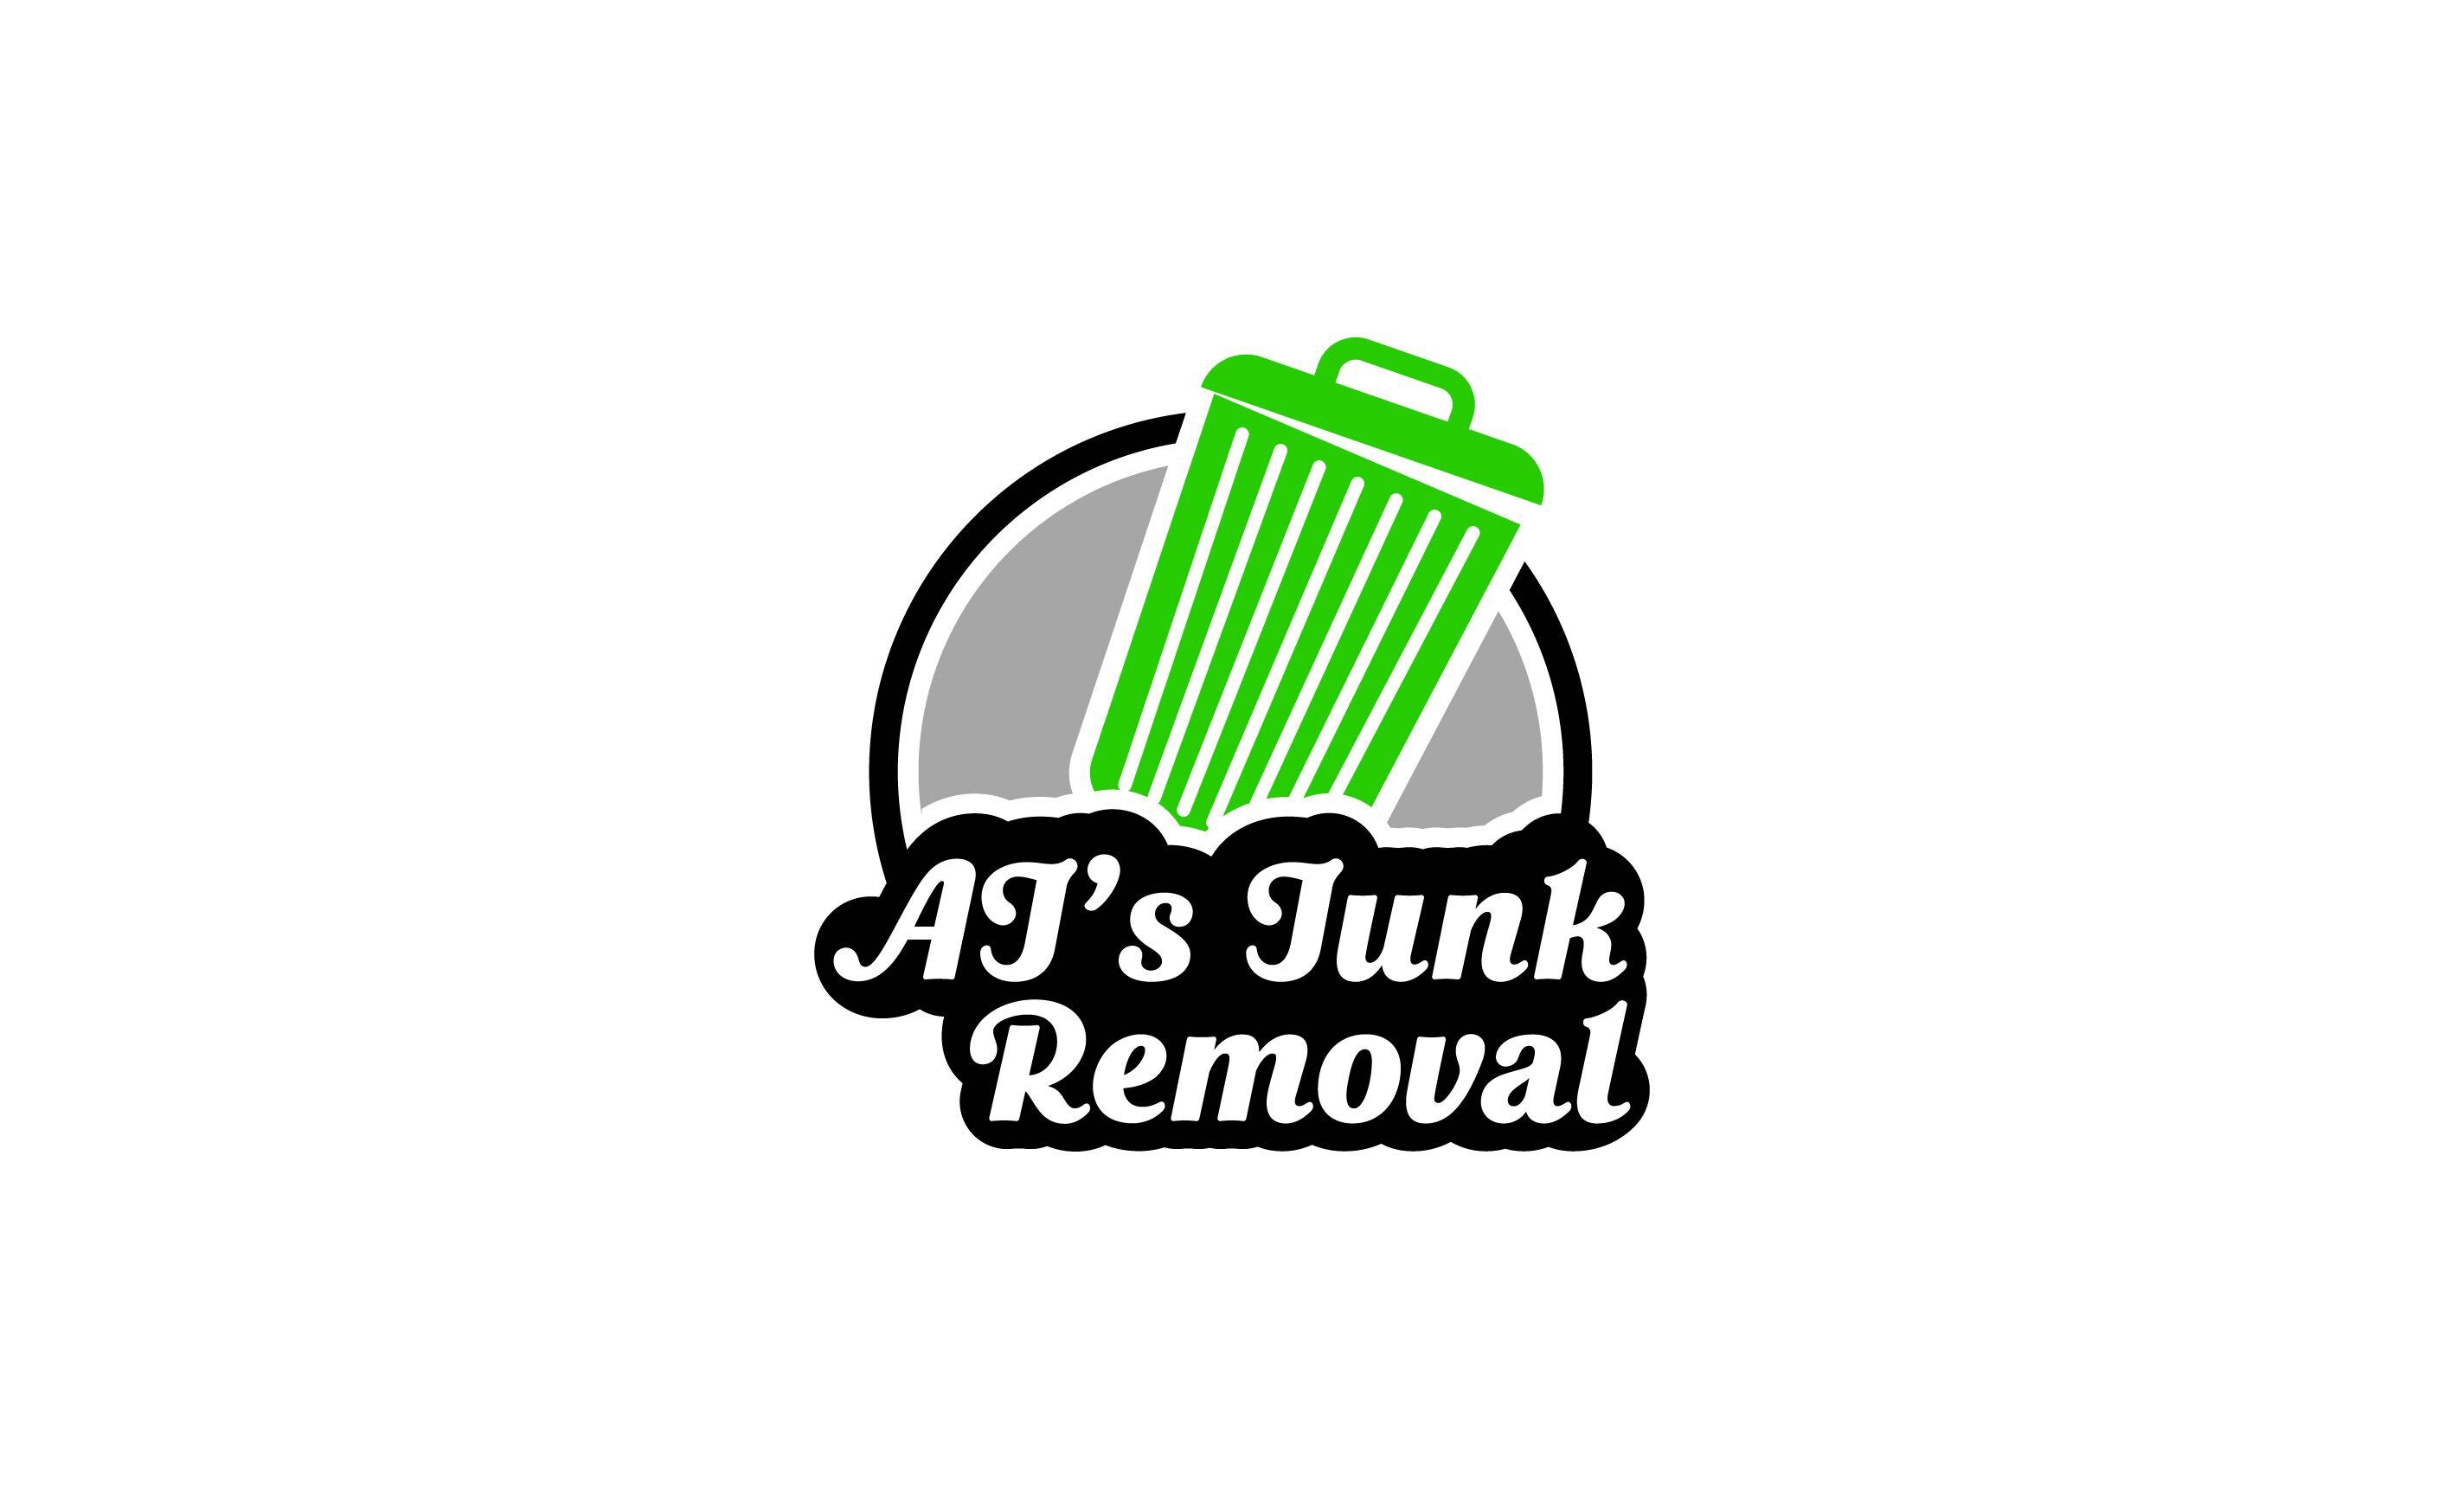 AJ's Junk Removal logo representing trusted and quality junk removal services in Fairfield County, Connecticut.